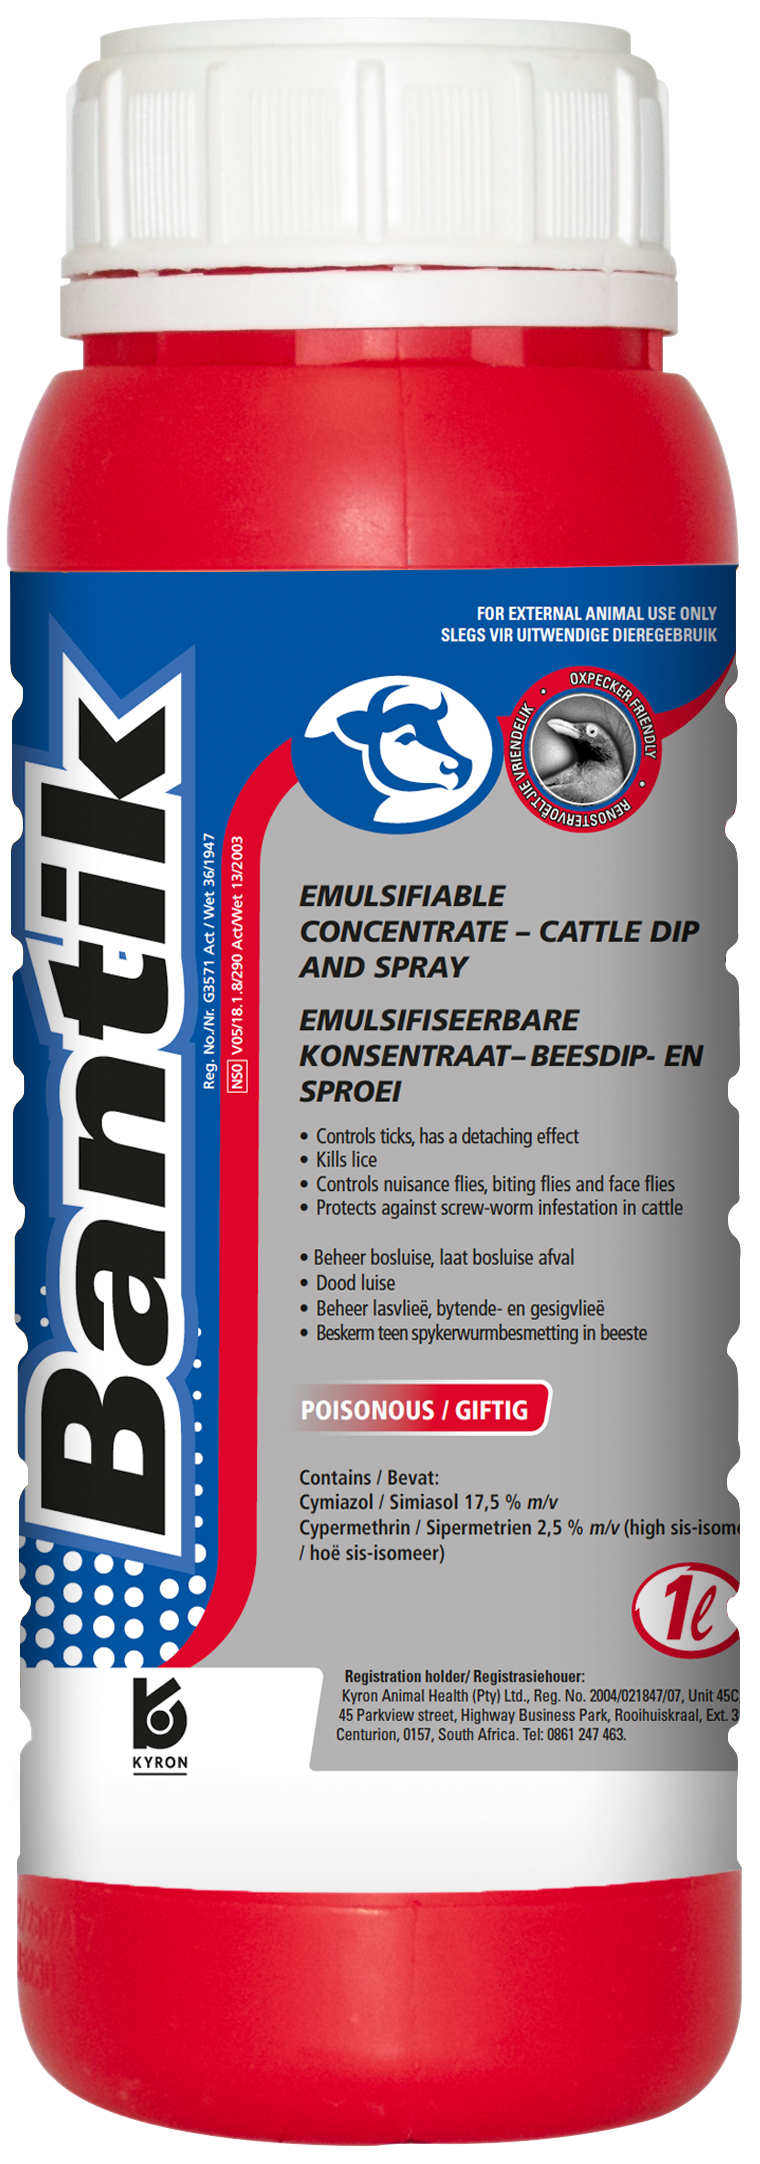 Emulsifiable concentrate that controls ticks, kills lice, controls nuisance-, biting- and face flies and protects against screw-worm infestations in cattle.